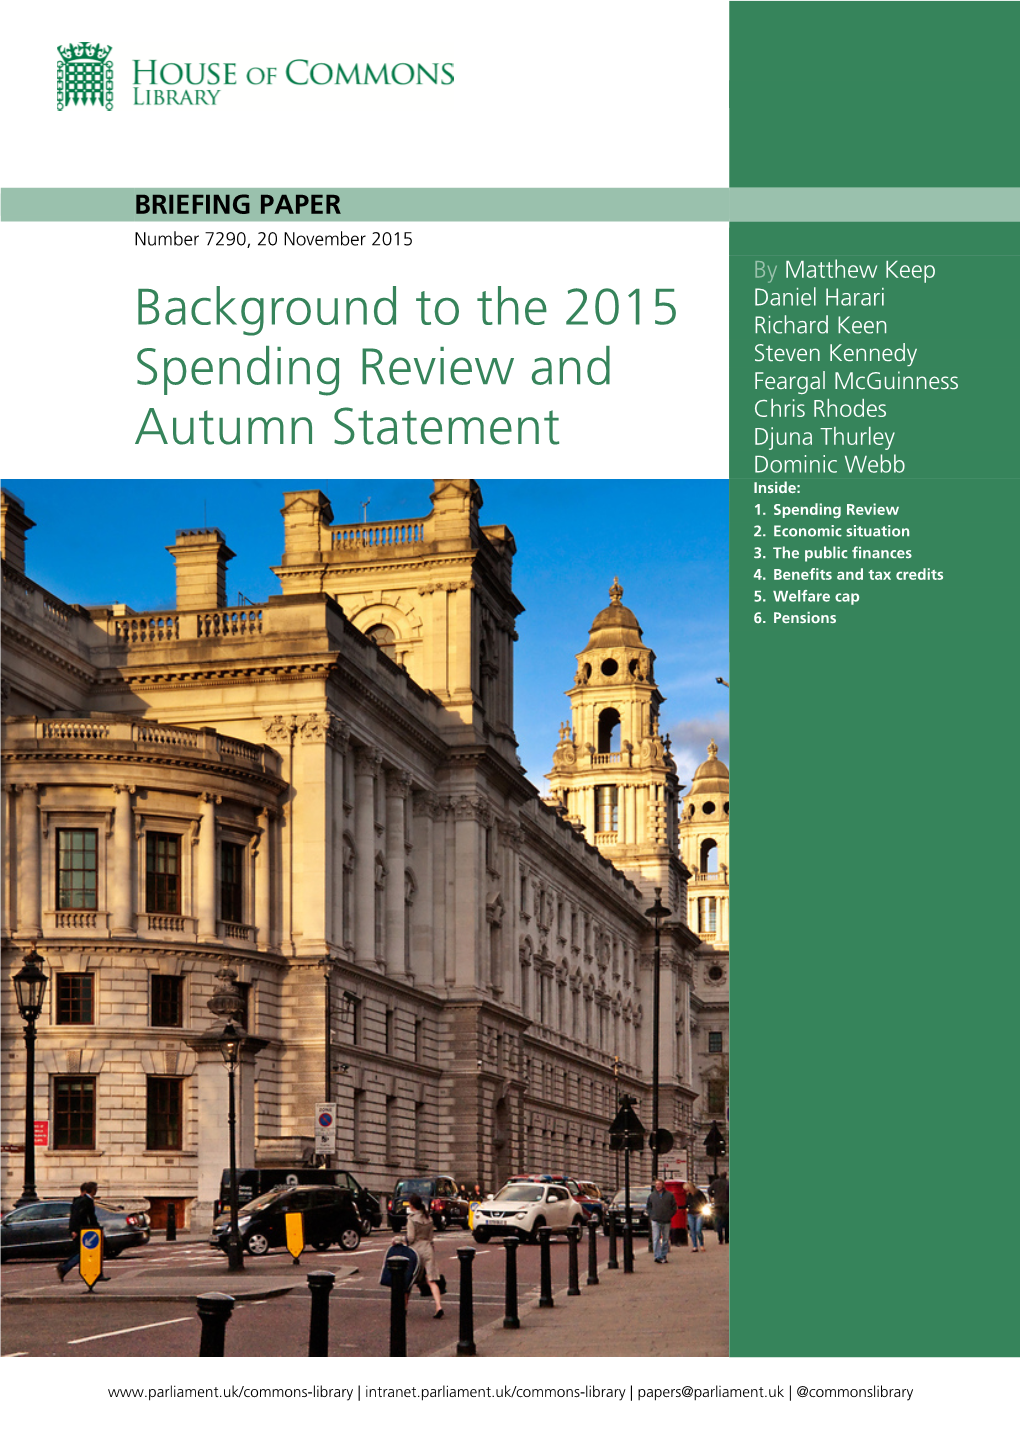 Background to the 2015 Spending Review and Autumn Statement